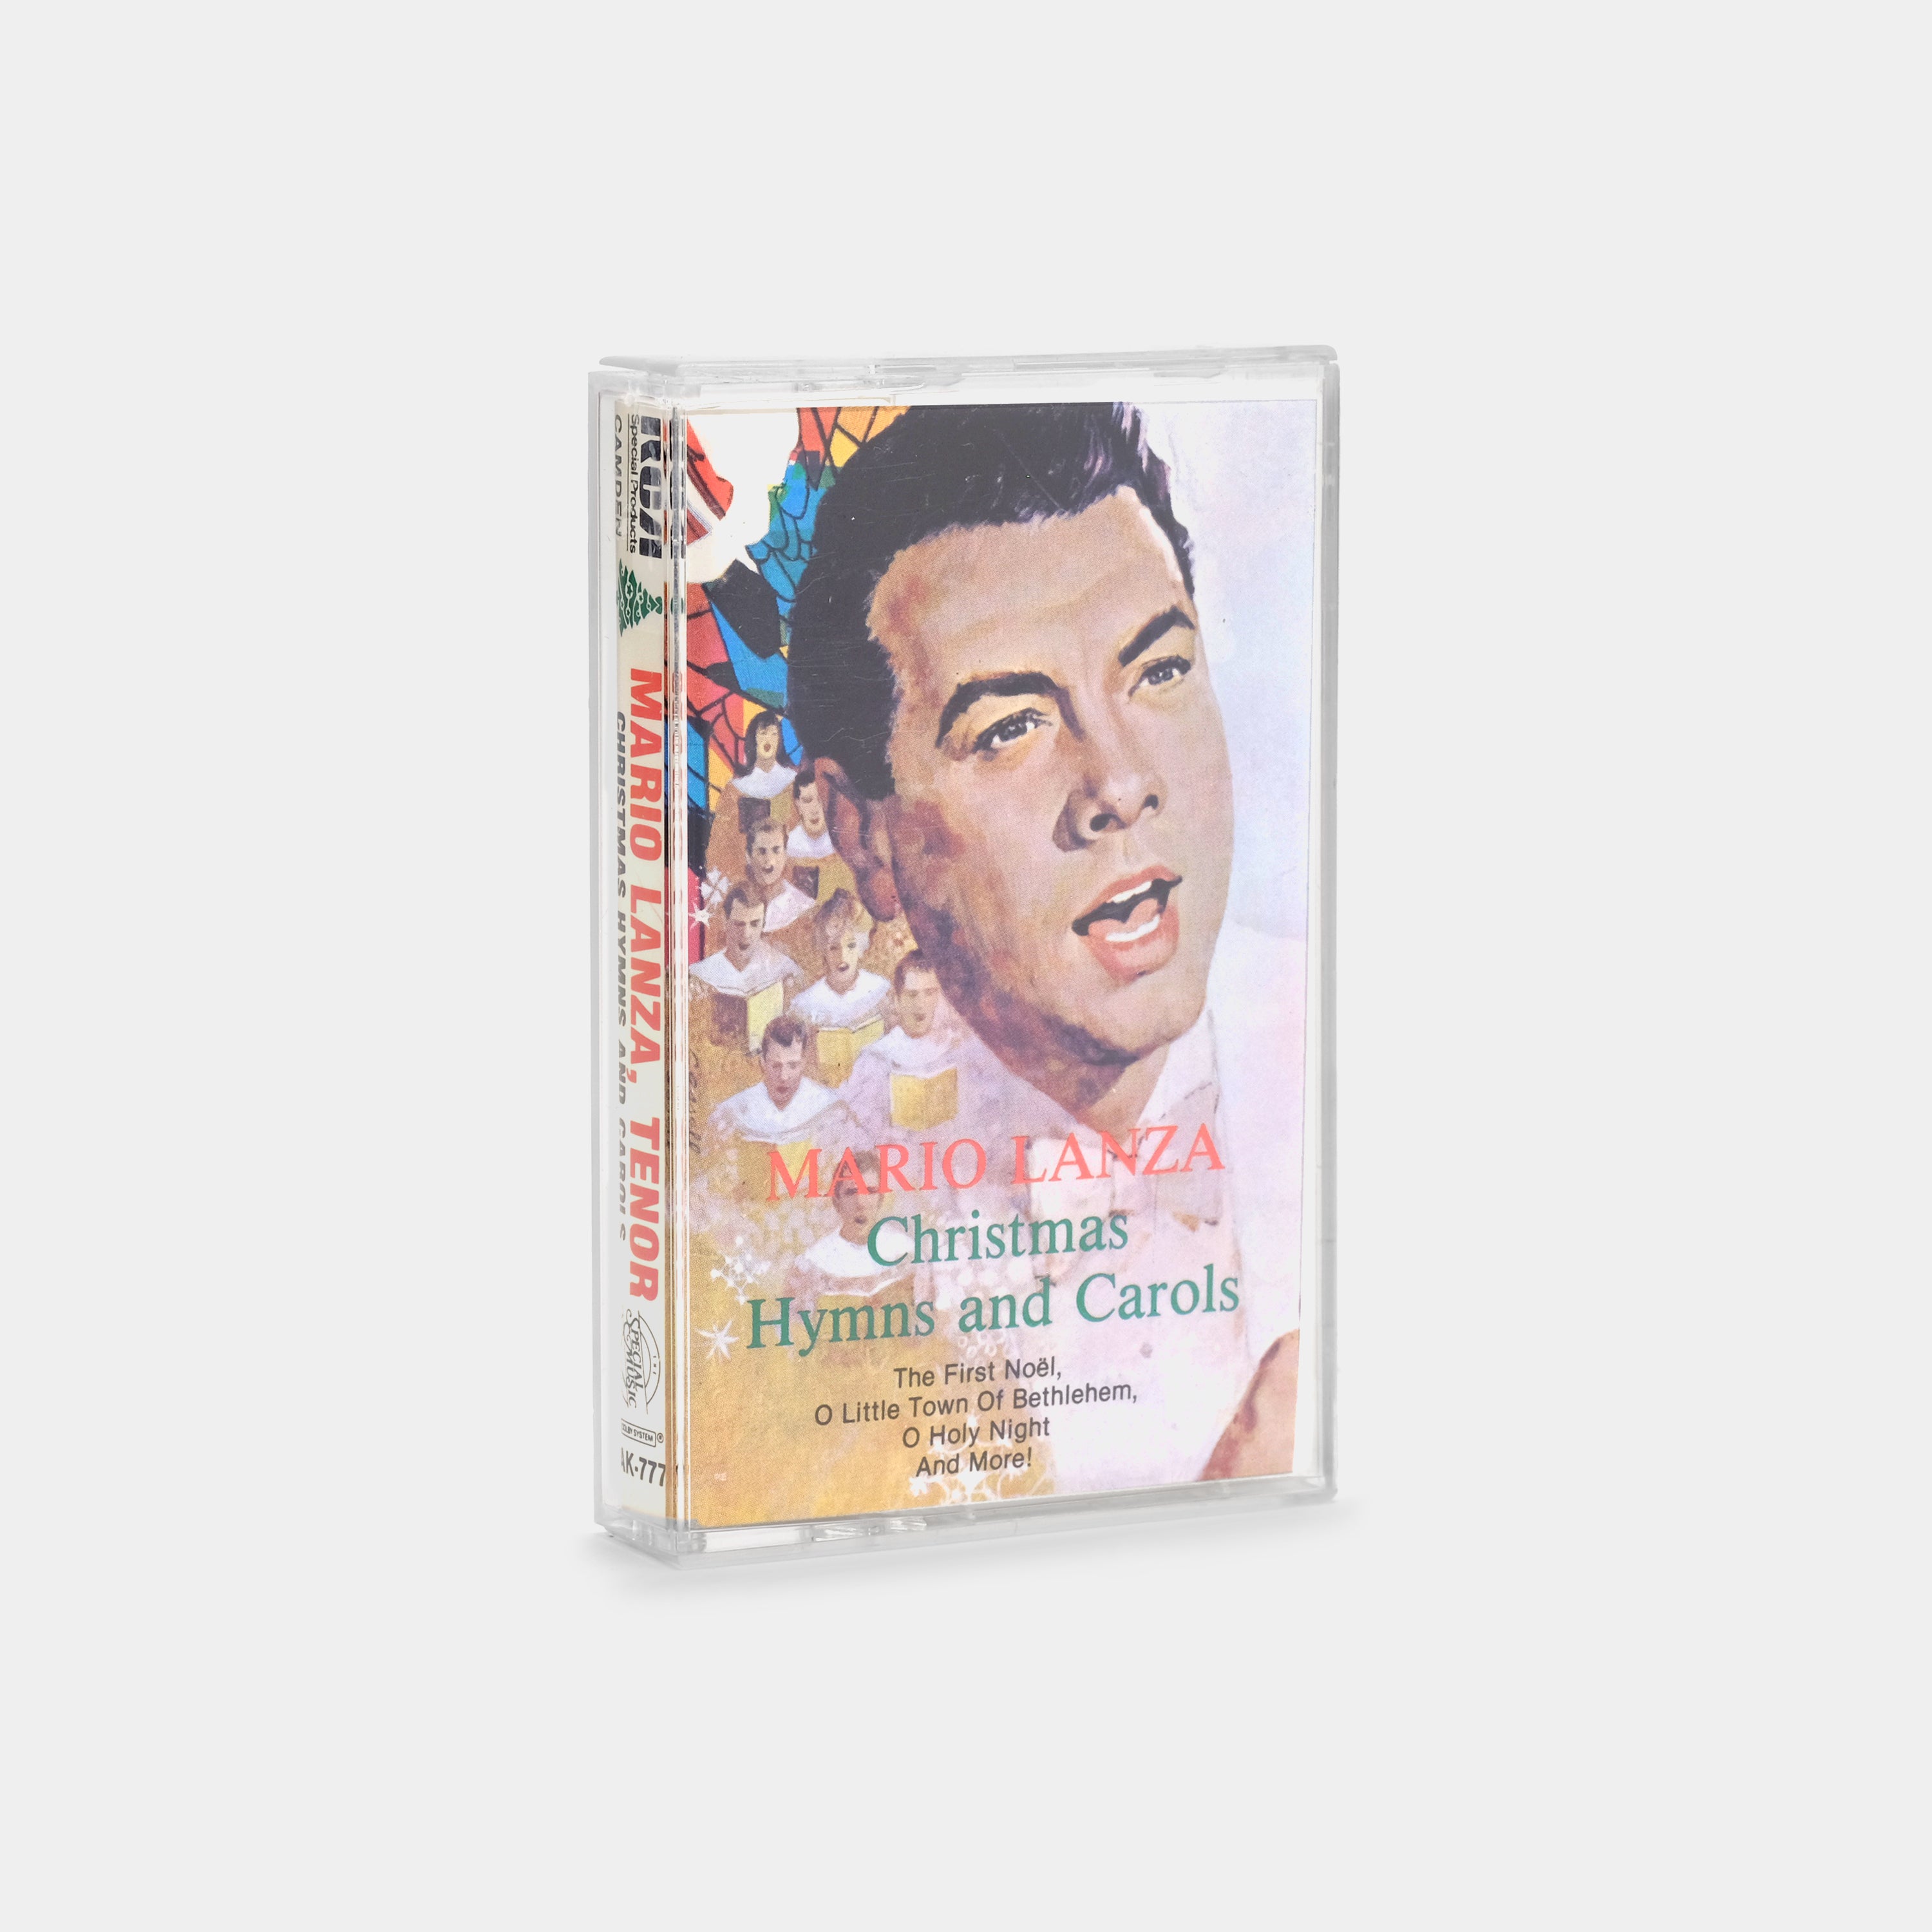 Mario Lanza - Christmas Hymns And Carols Cassette Tape